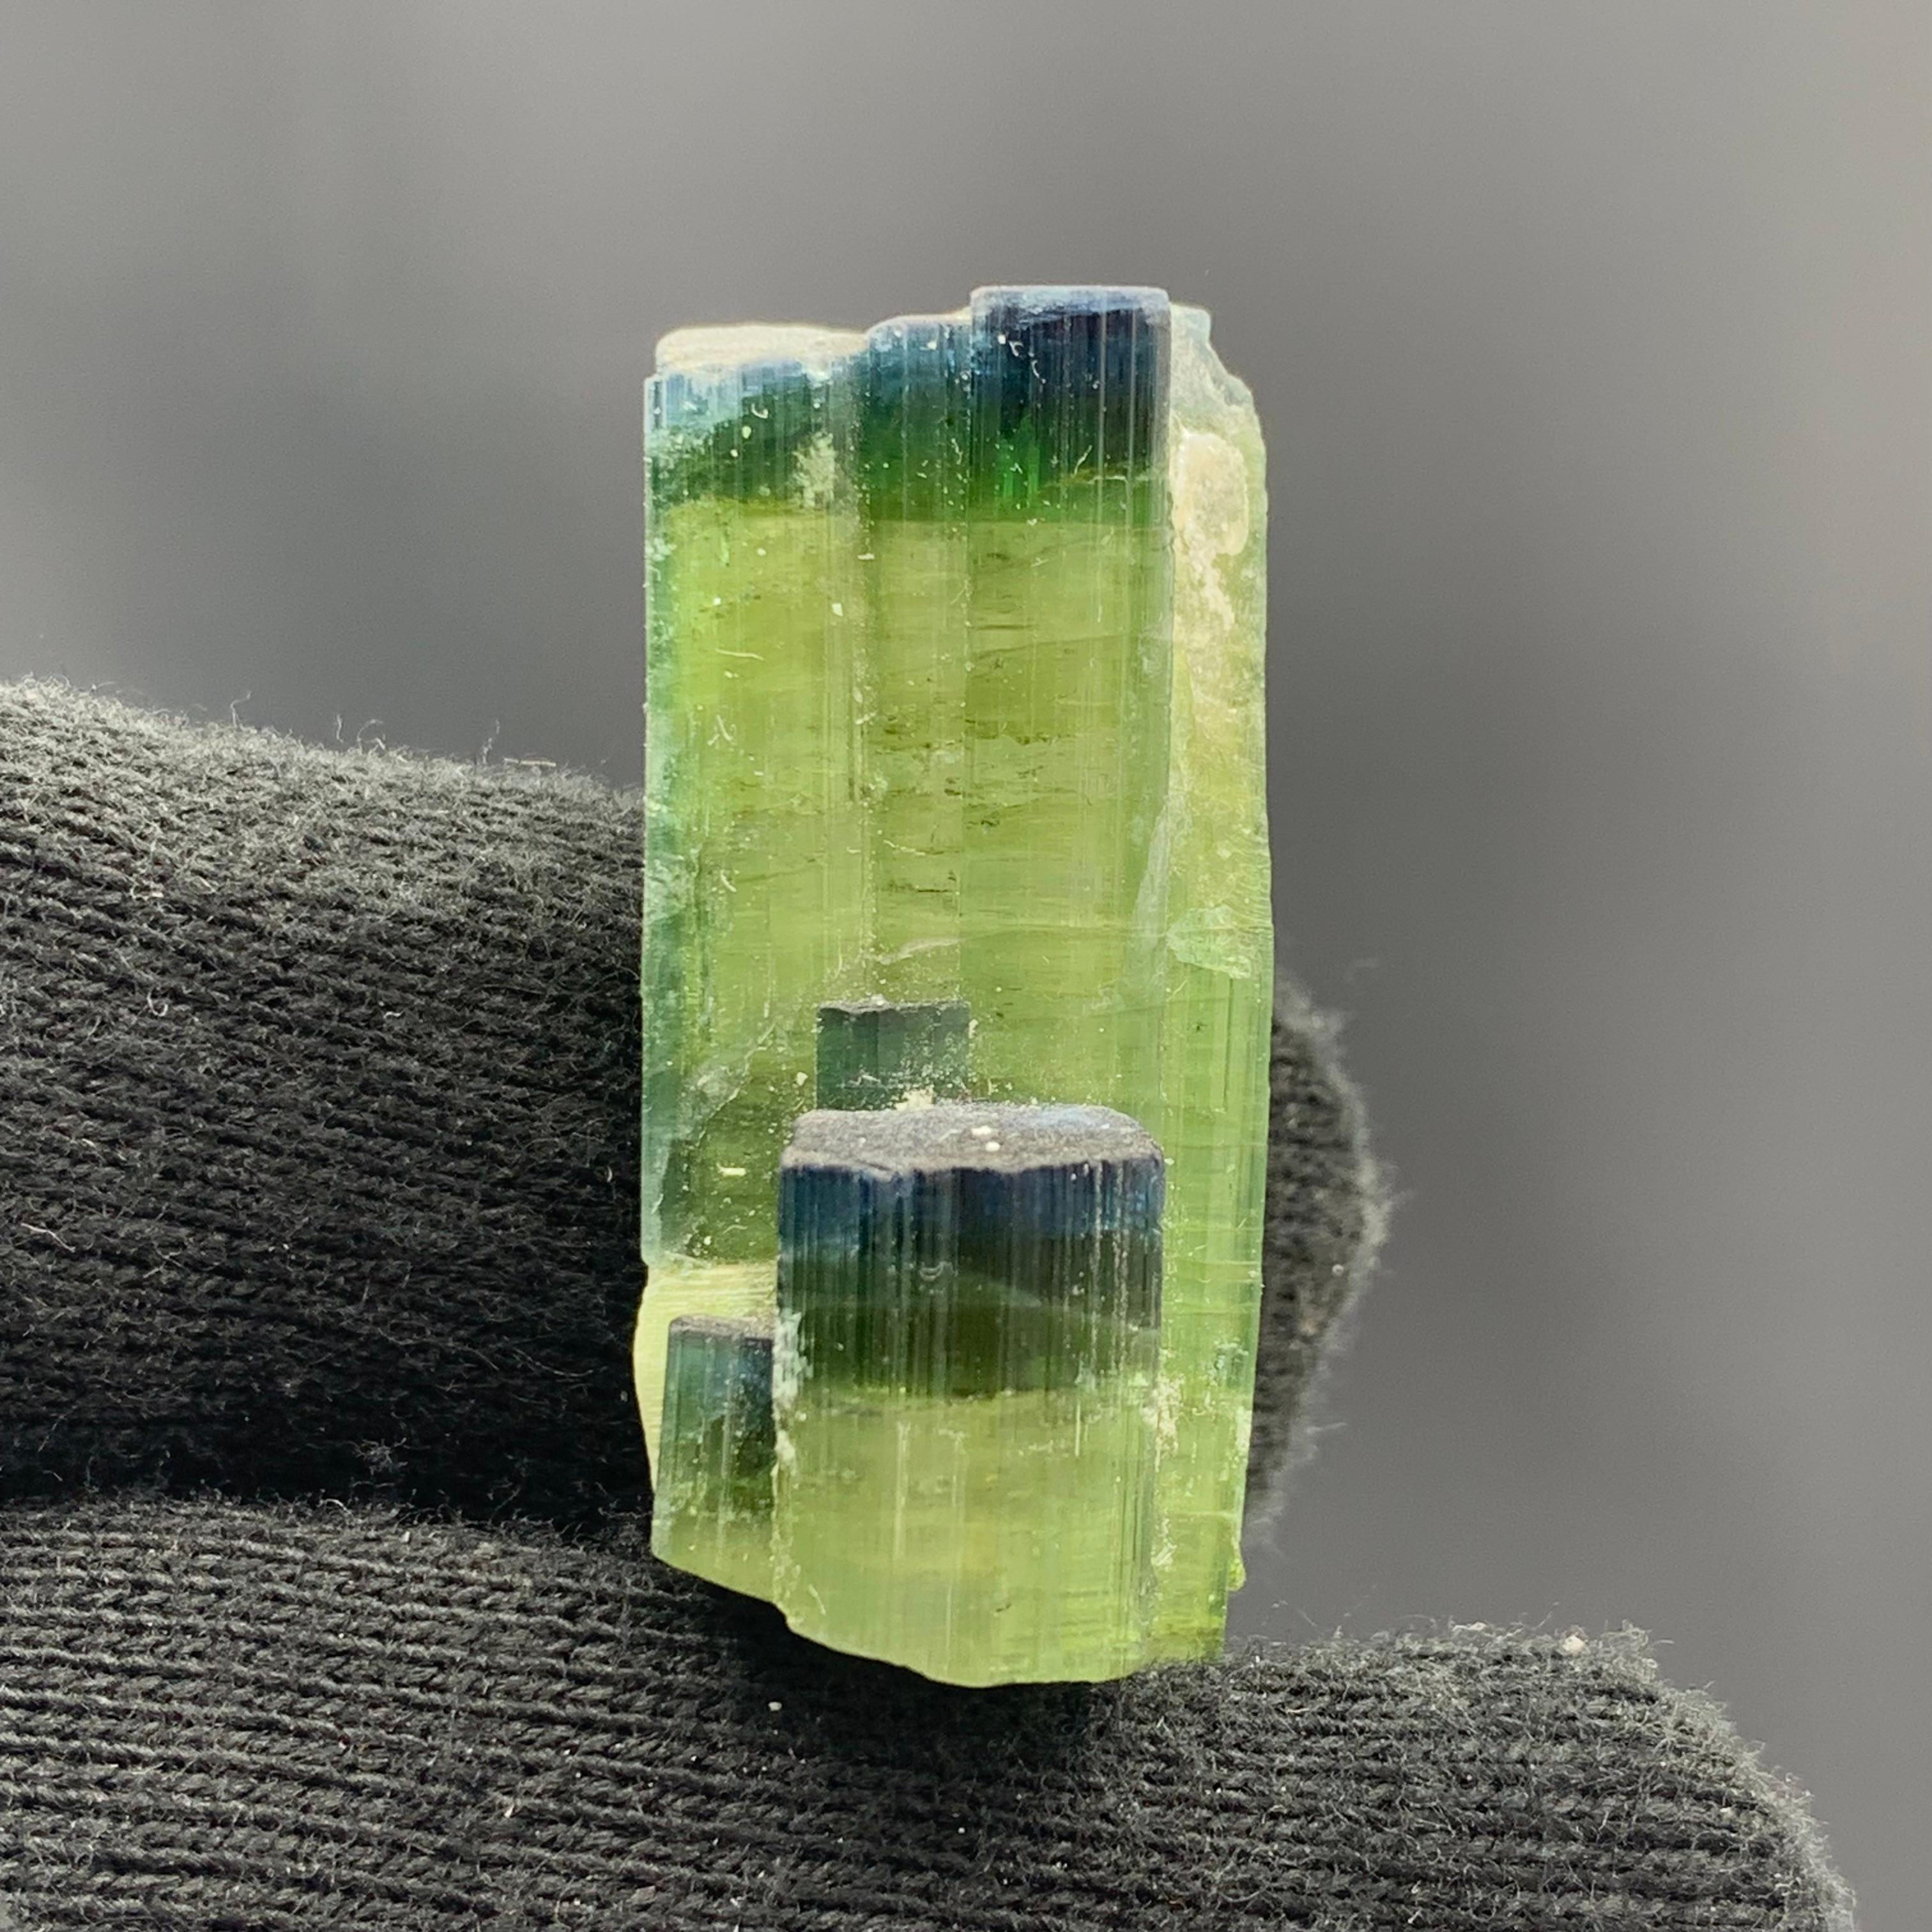 12.08 Gram Tri Color Dual Tourmaline Crystals From Kunar, Afghanistan 

Weight: 12.08 Gram 
Dimension: 3.5 x 1.6 x 1.4 Cm
Origin: Kunar, Afghanistan

Tourmaline is a crystalline silicate mineral group in which boron is compounded with elements such